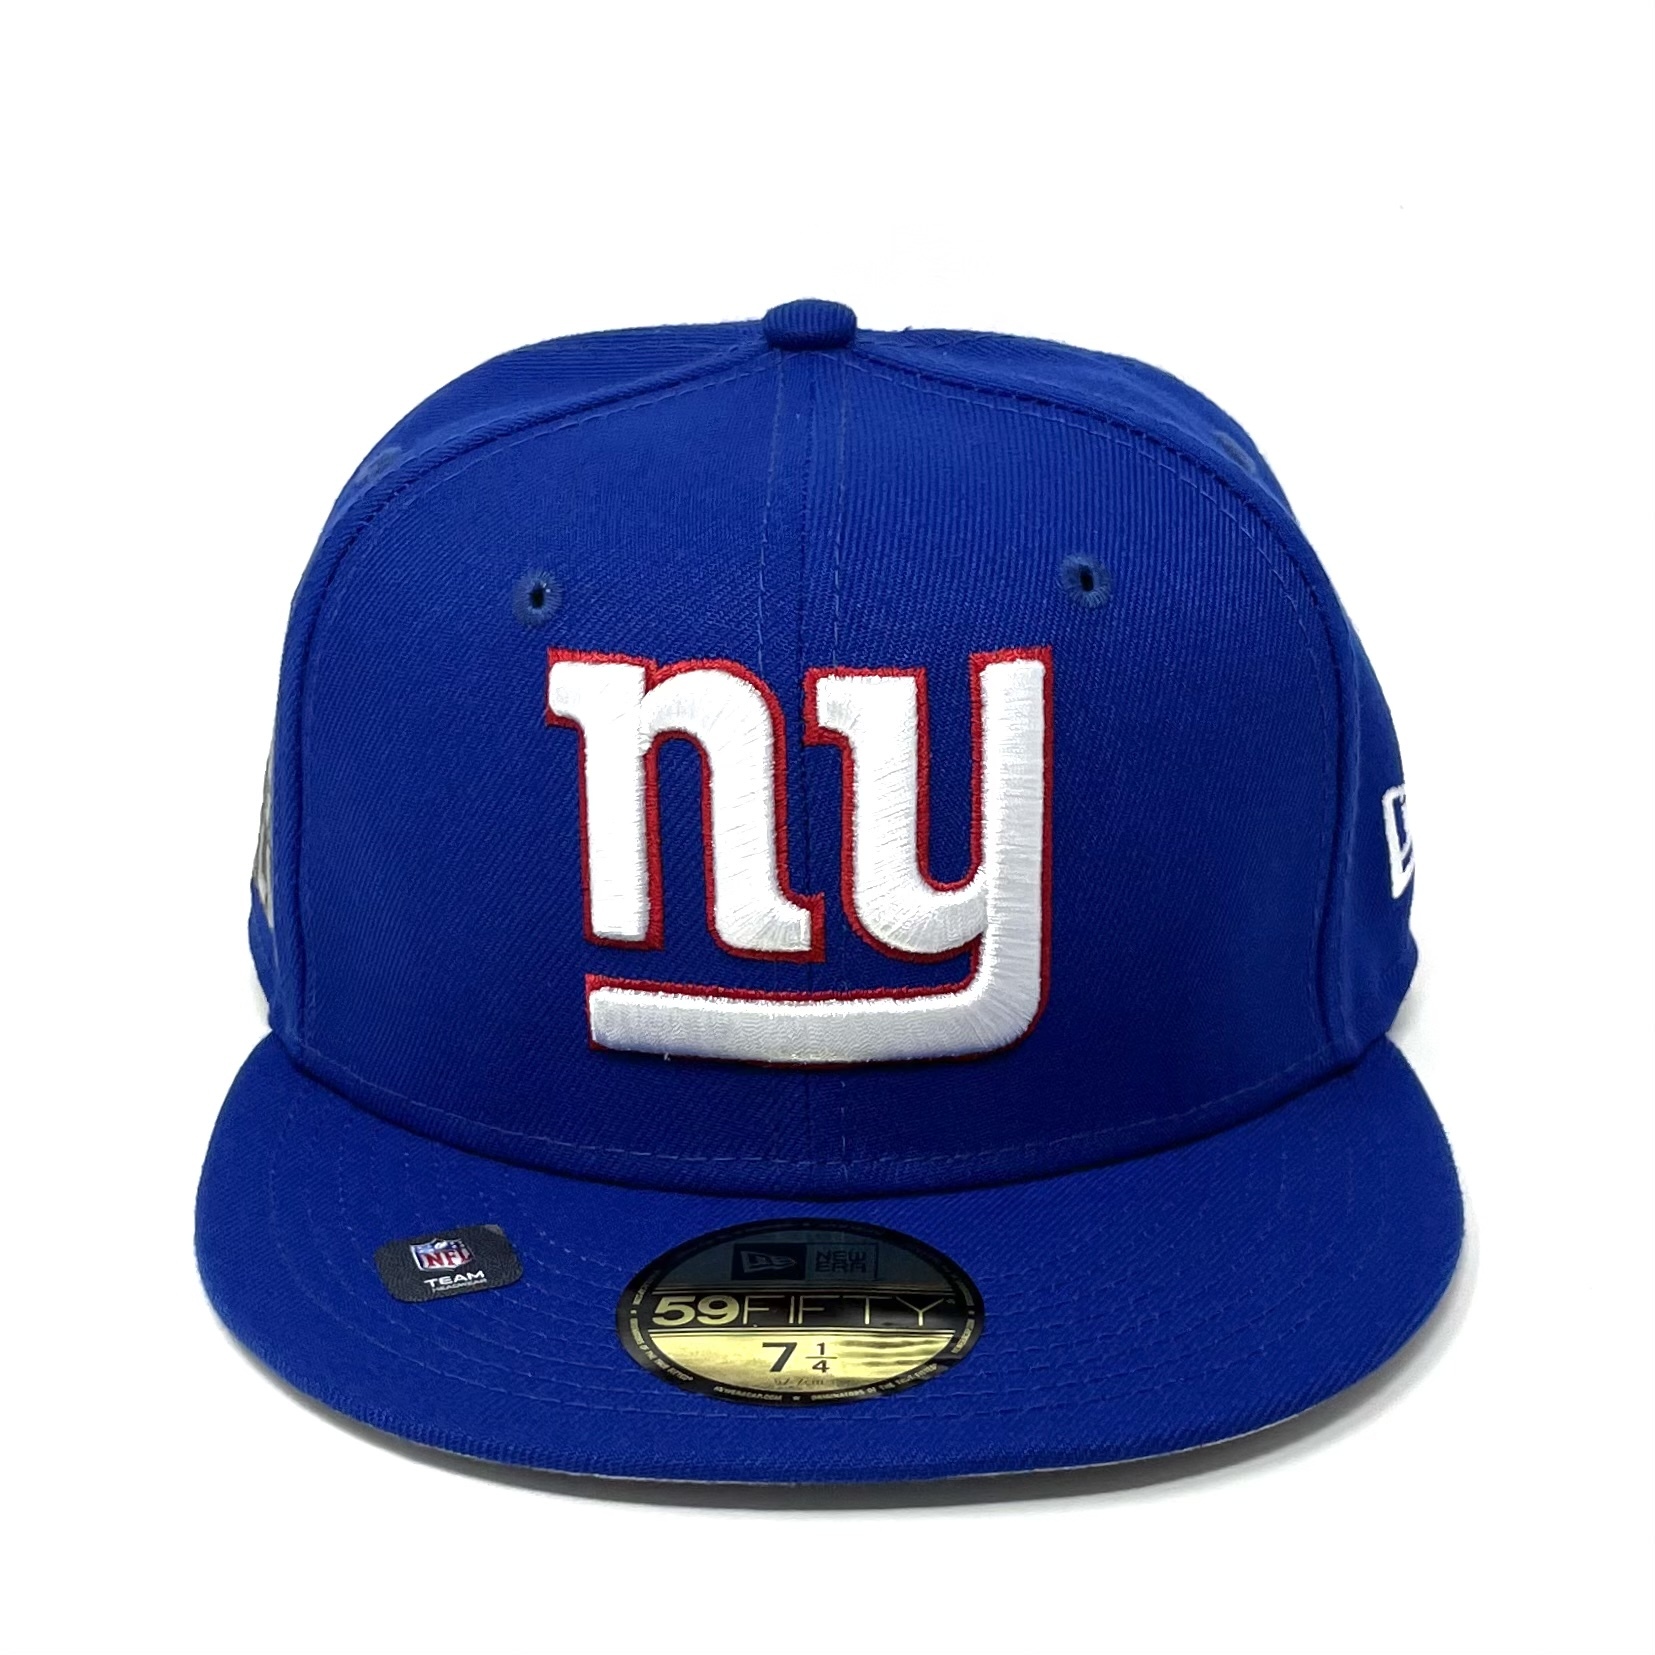 New York Giants Men’s New Era NFL Super Bowl XLVI Patch 59FIFTY Fitted Hat